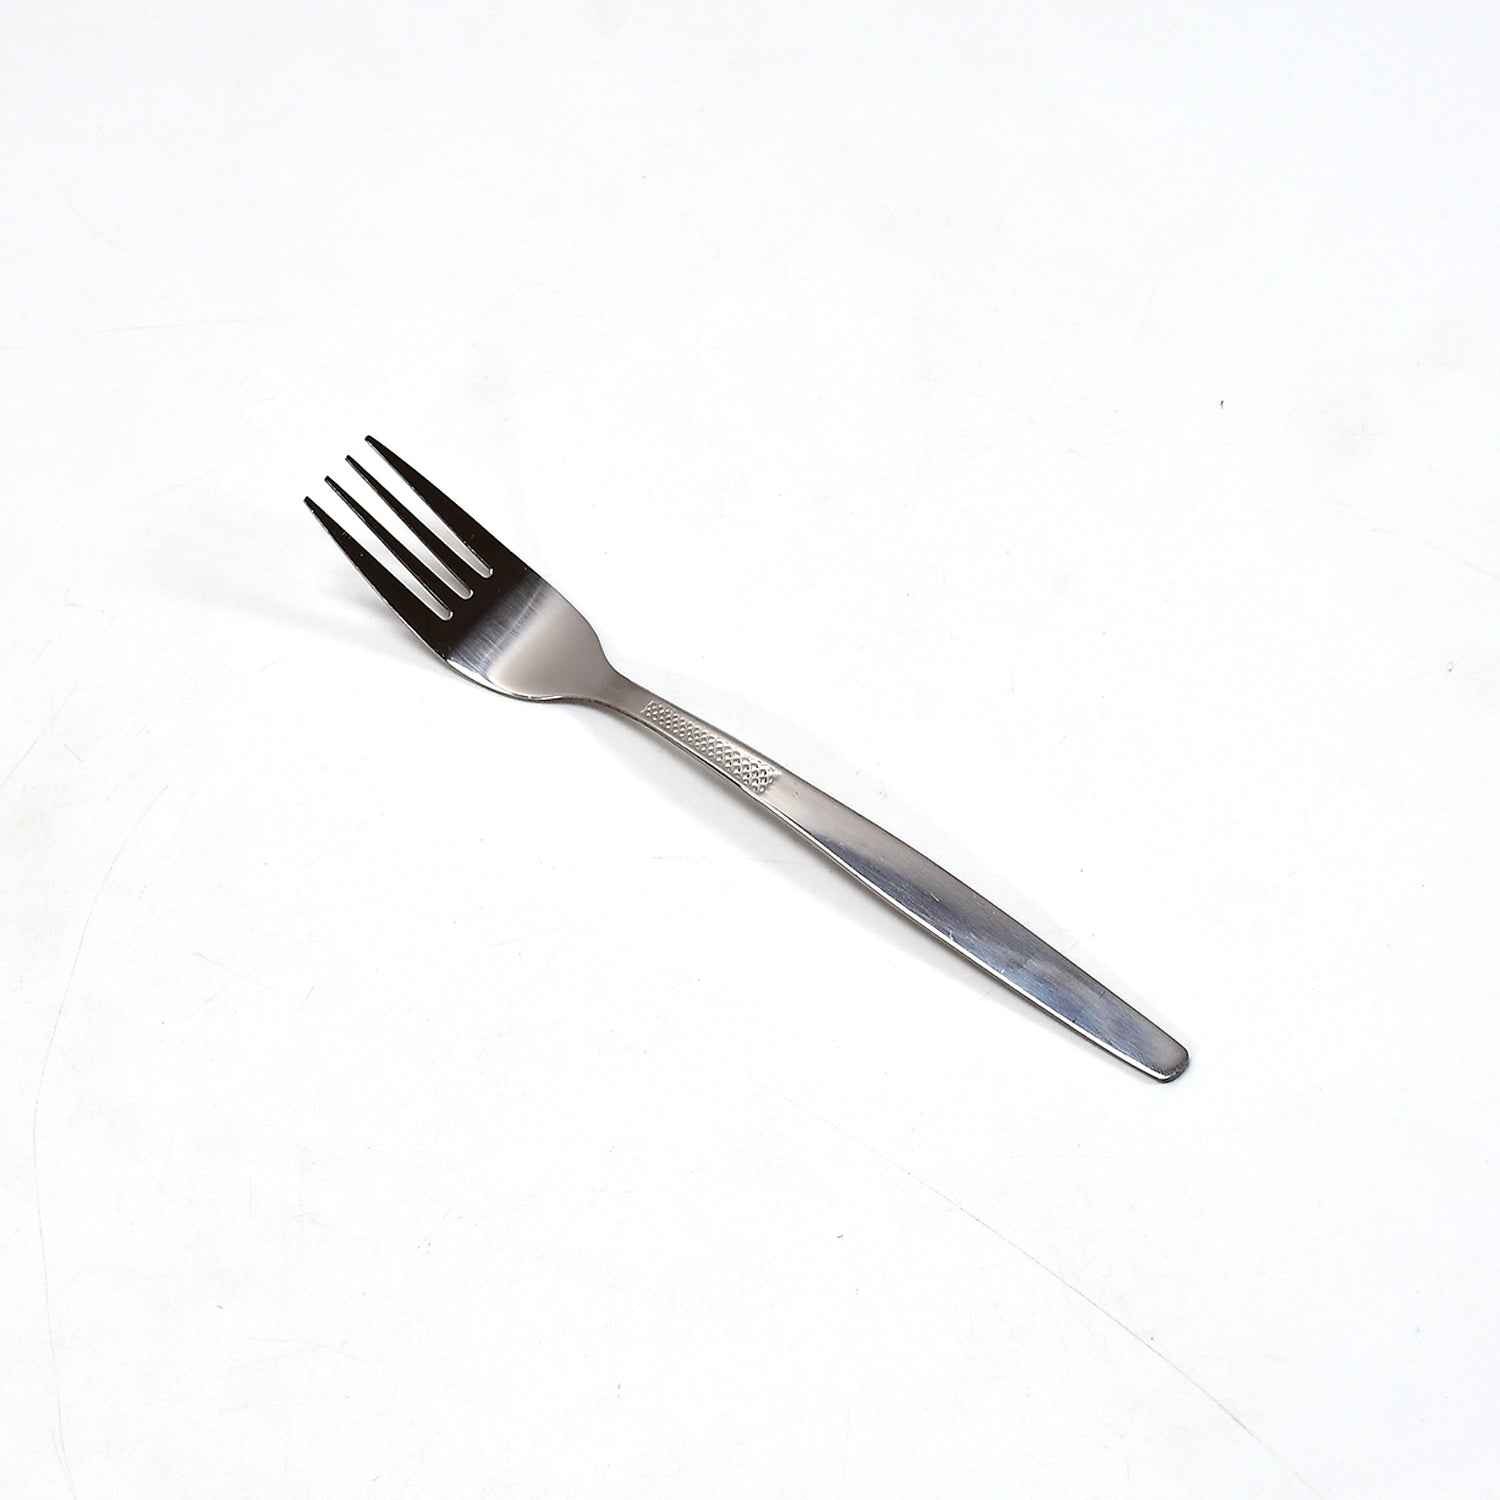 2912 Cutlery Table Forks for kitchen | Stainless Steel Forks, Dinner Forks, Genware Forks, Millennium Cutlery DukanDaily